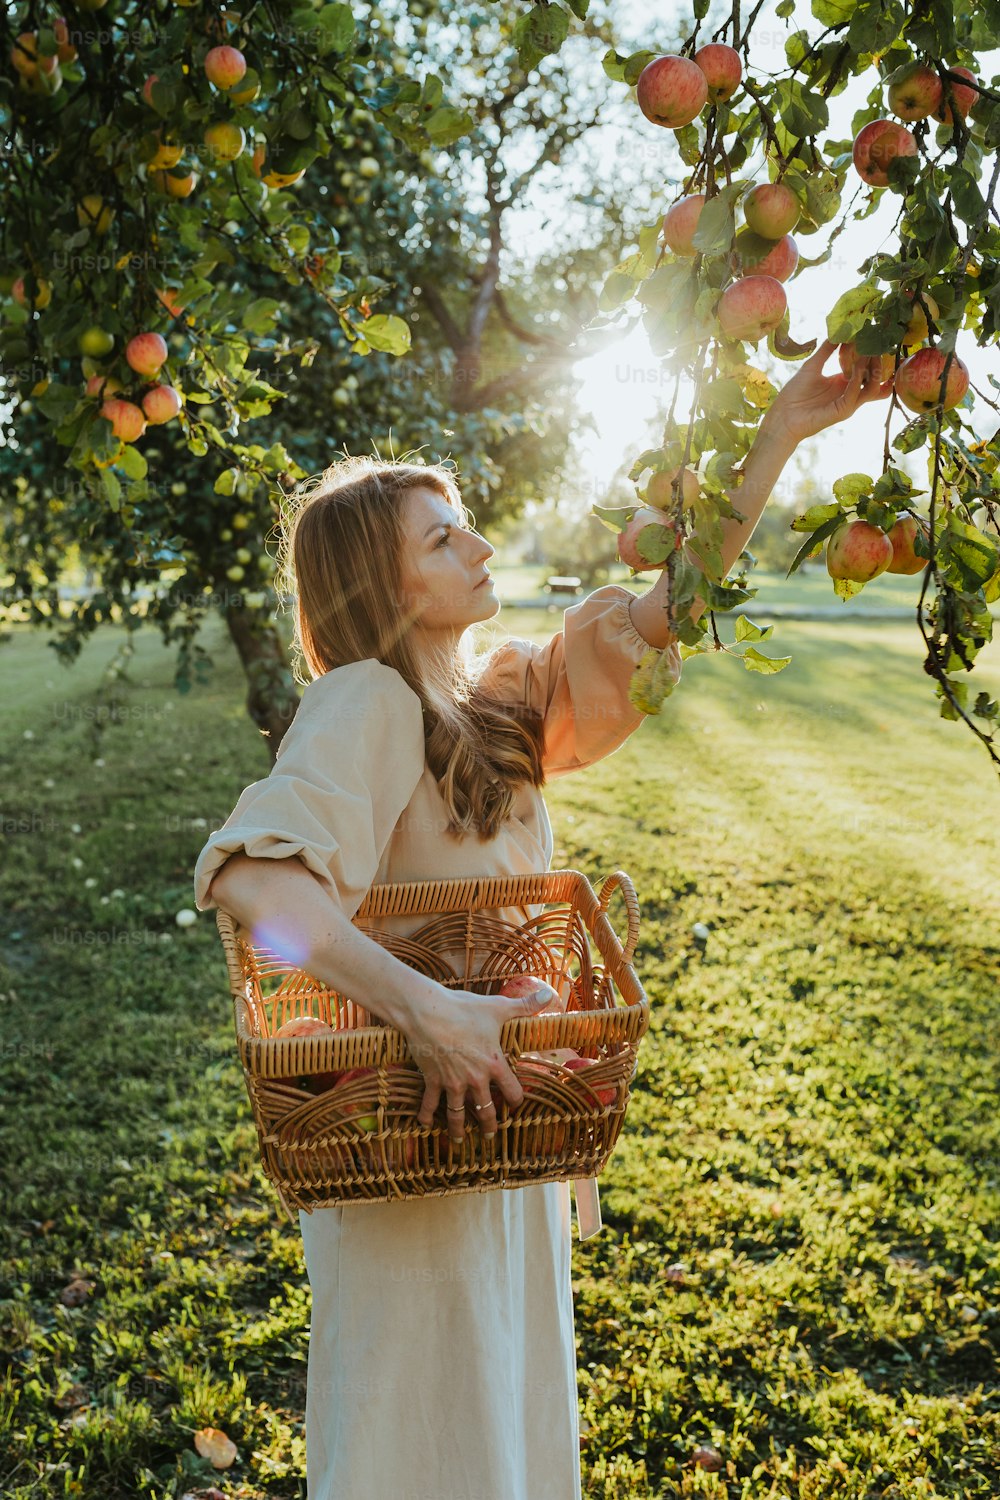 a woman is picking apples from a tree